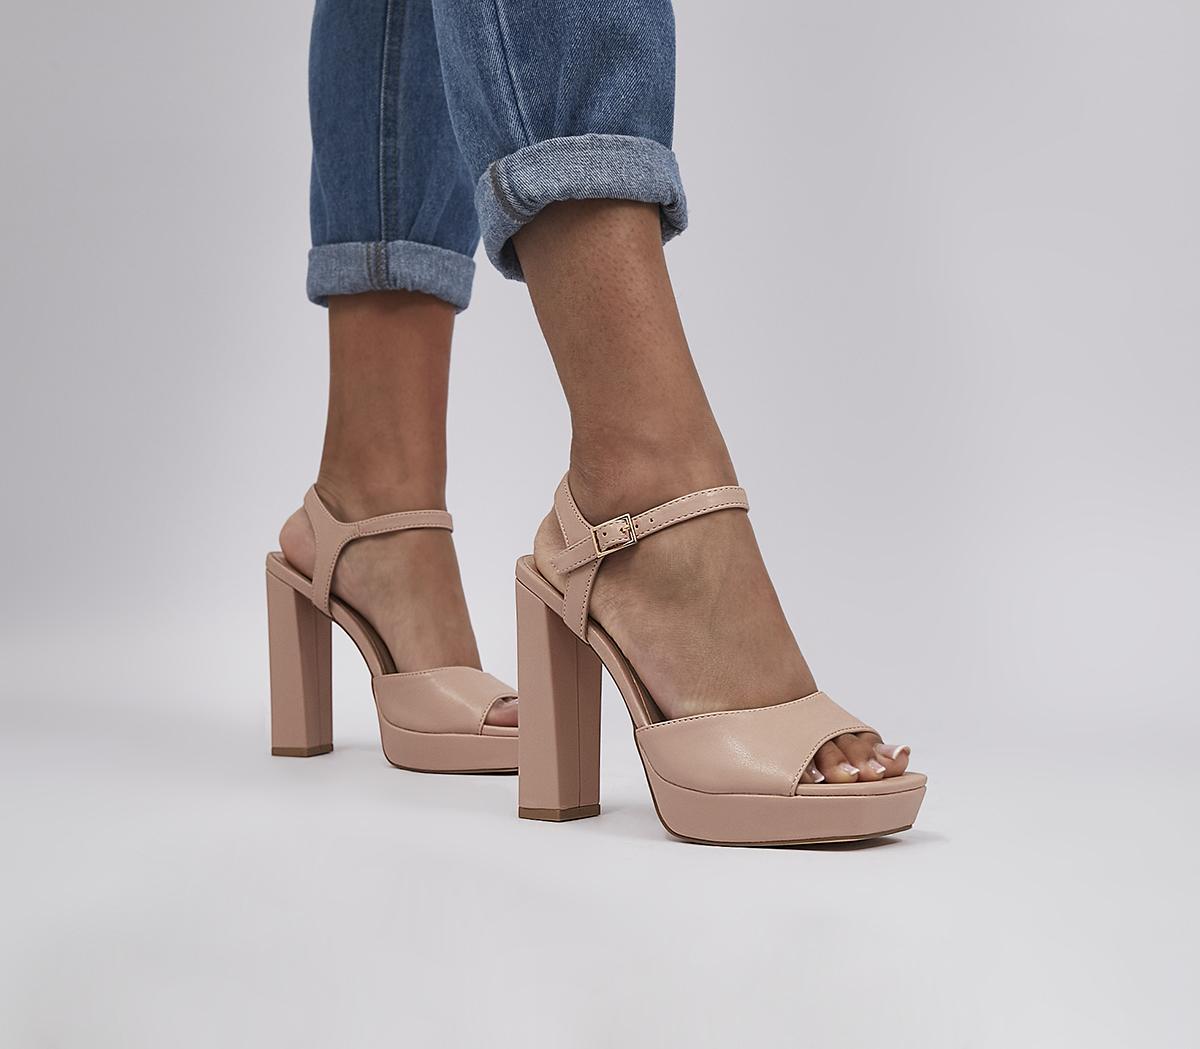 Wide Fit Hearty Square Toe Platforms Beige